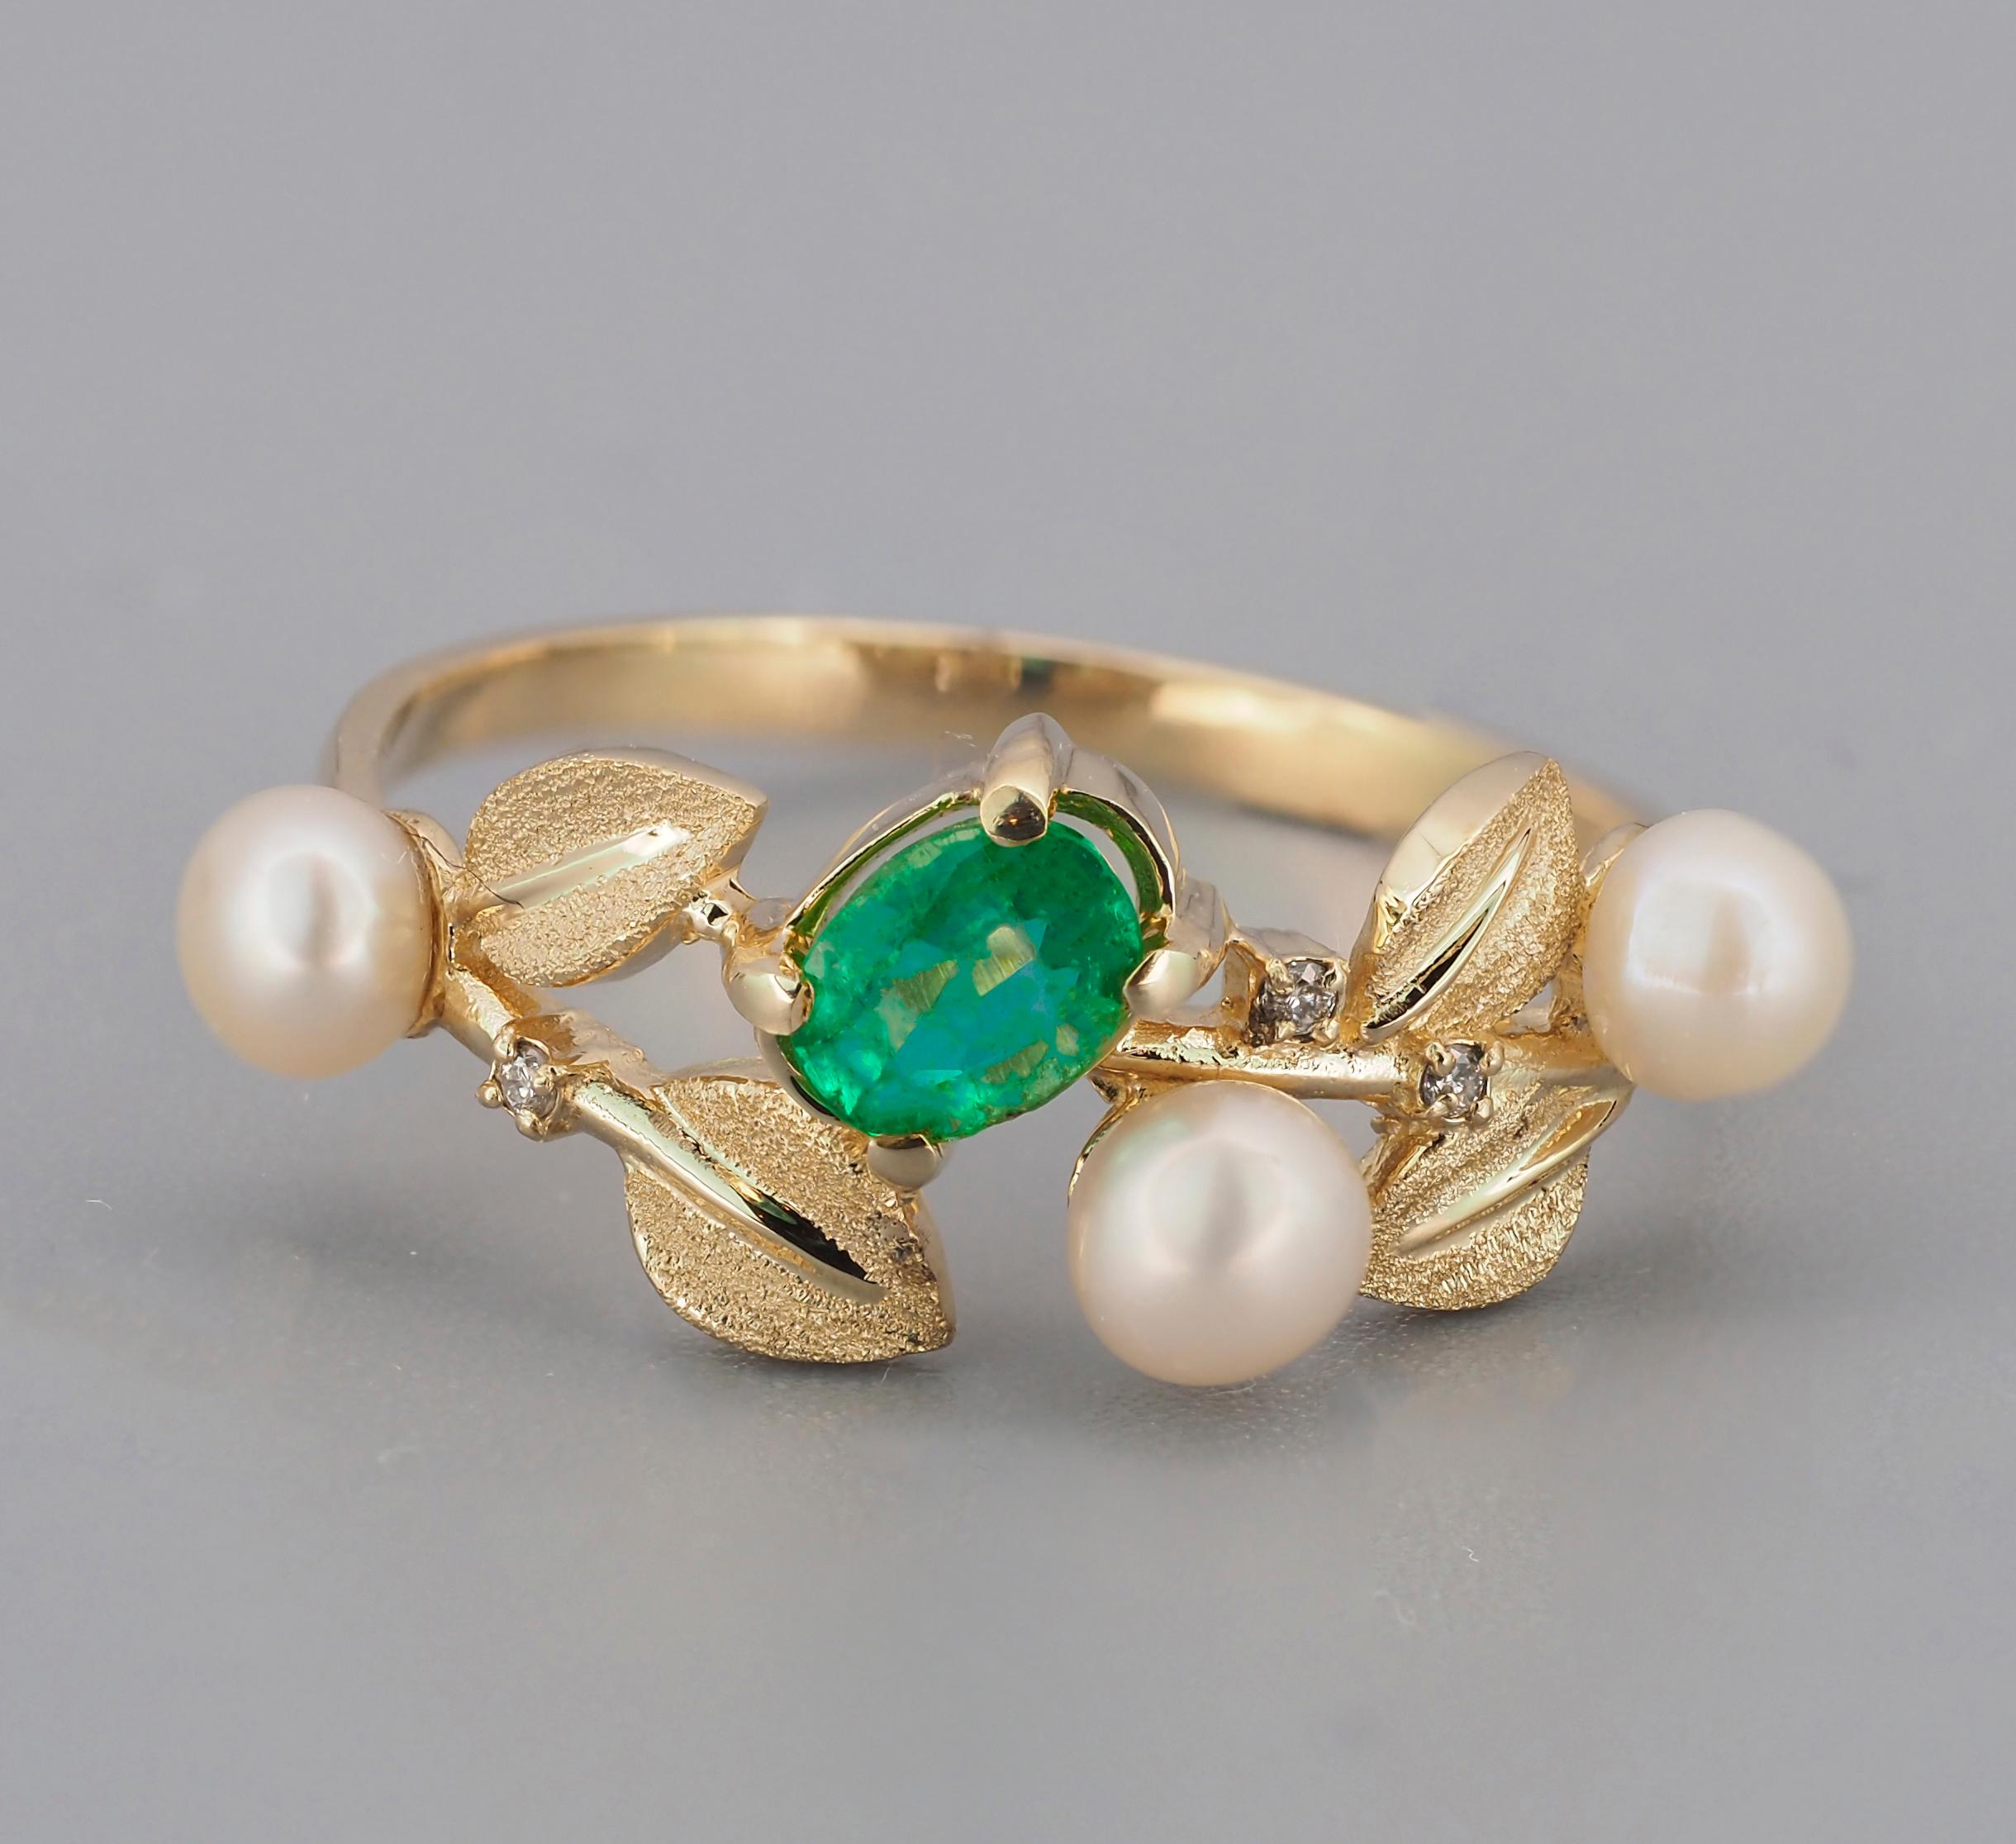 14k gold ring with emerald, pearls and diamonds. 
Weight approx. 2.2 g.
Gold - 14k yellow gold

Central stone: Emerald
Cut: Oval
Weight: aprx 0.7 ct. (6x4 mm)
Color: blue - green
Clarity: Transparent with inclusions (See in photo)
Diamonds: G/VS1,